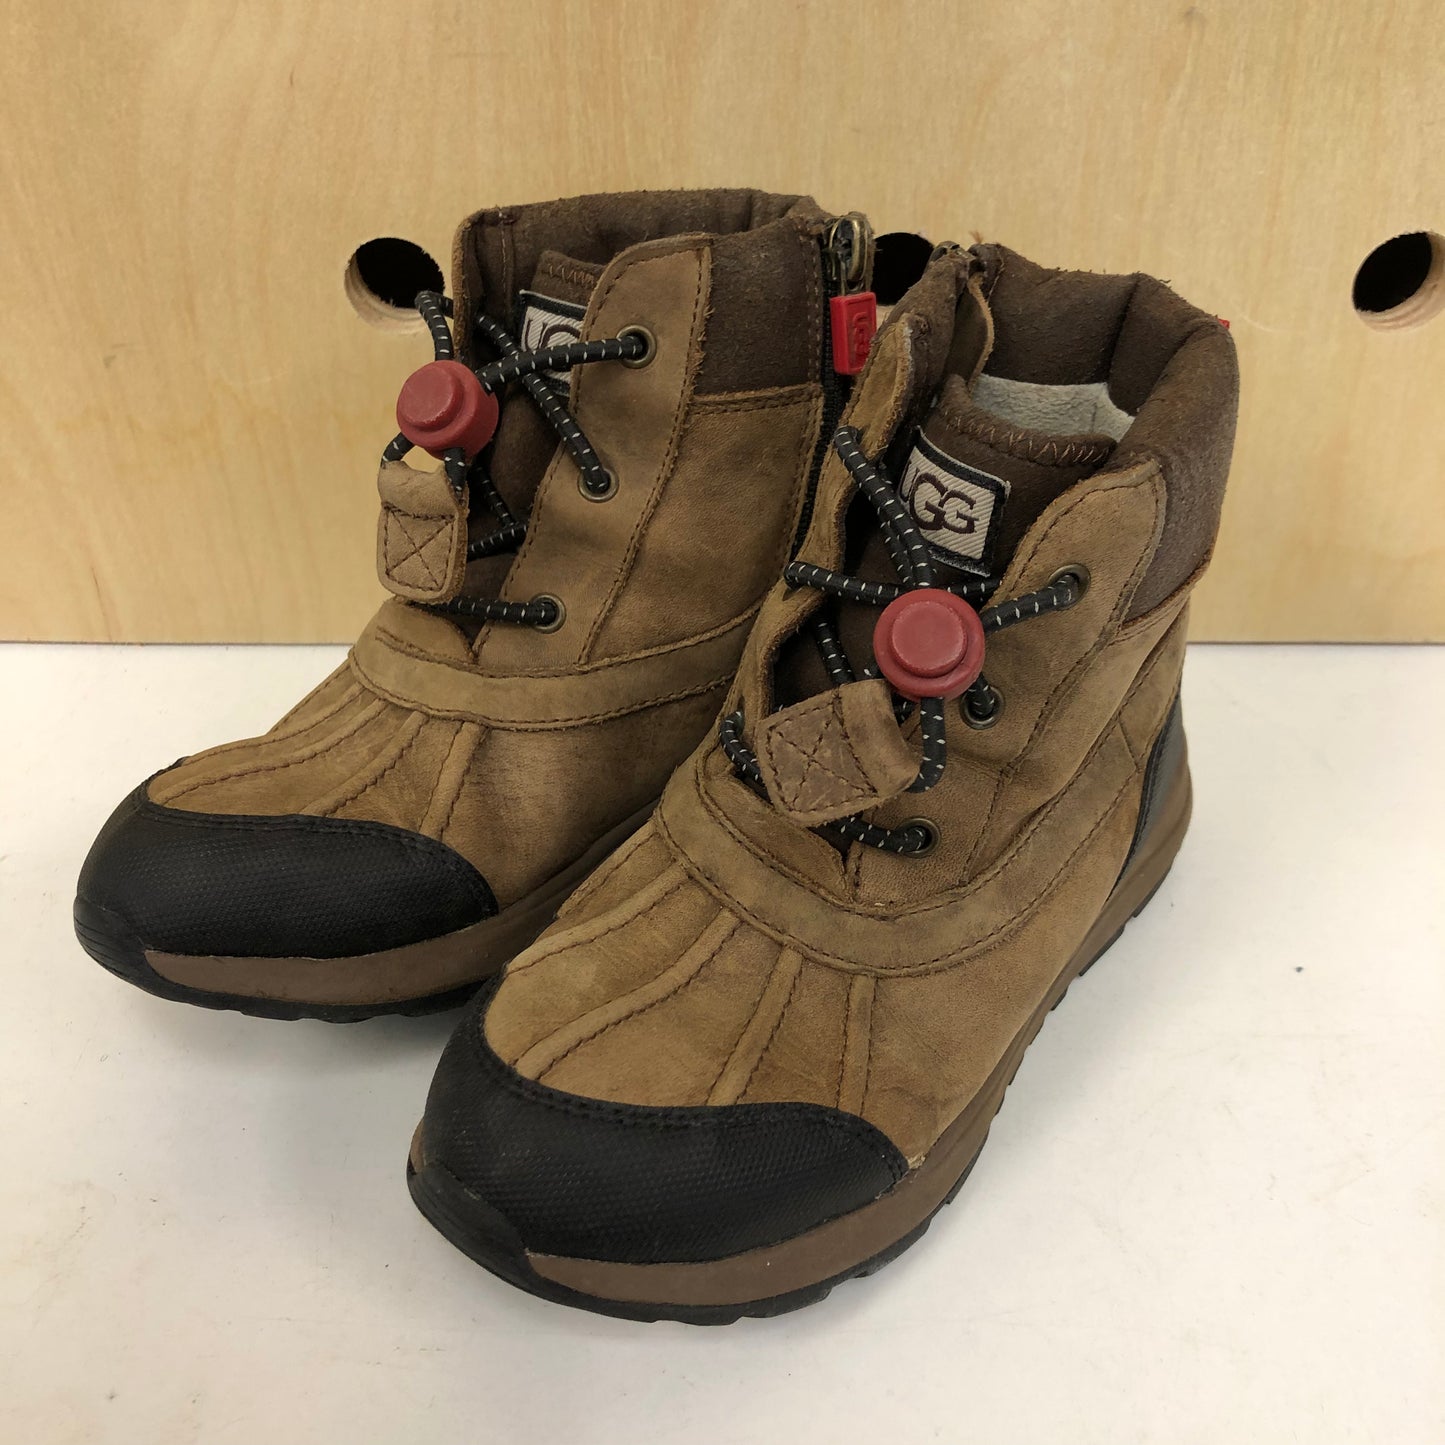 Turlock Leather Weather Boots